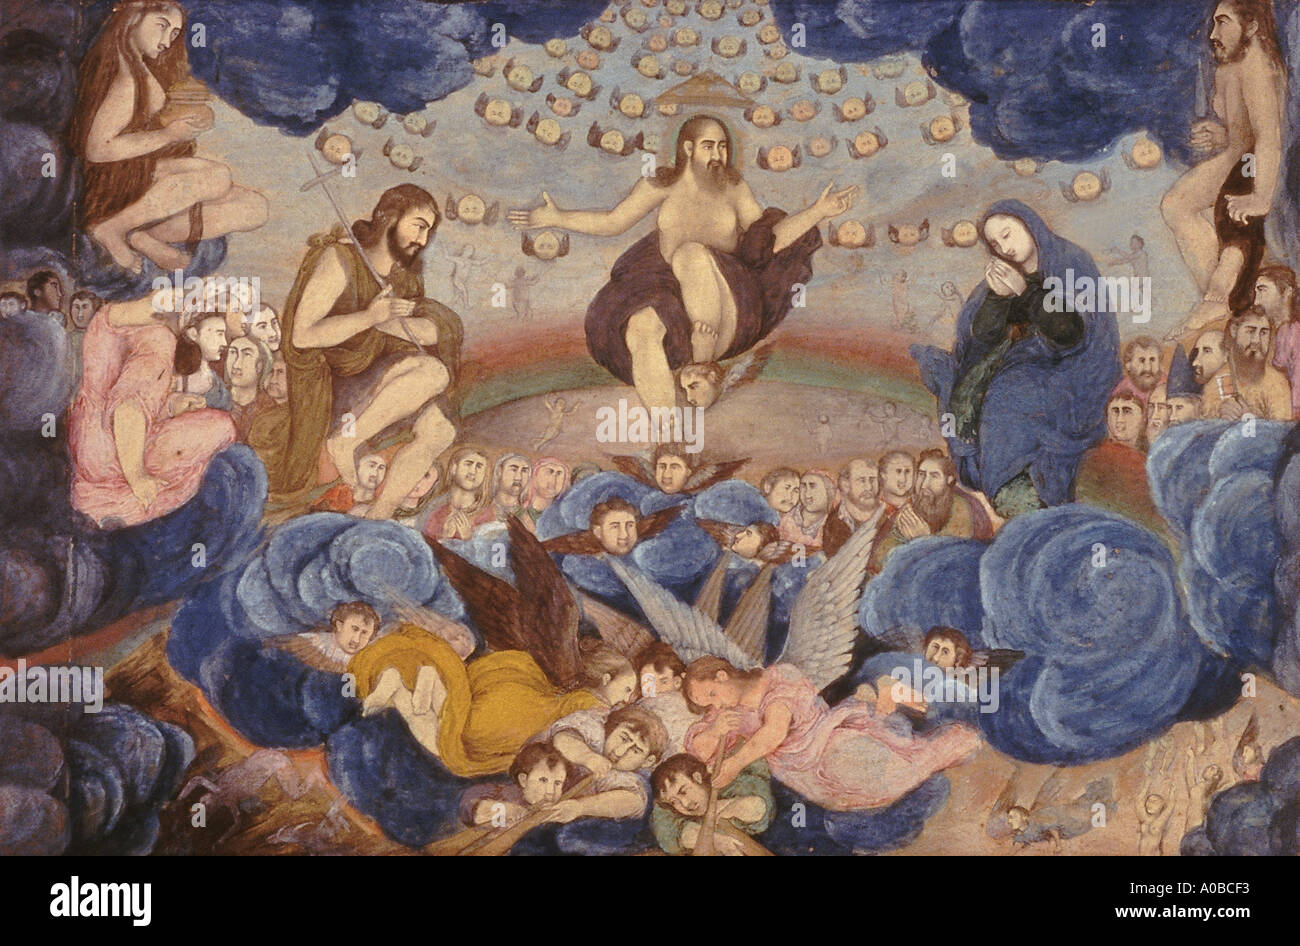 Painting : The Last Judgment Dated 1750 A D Stock Photo